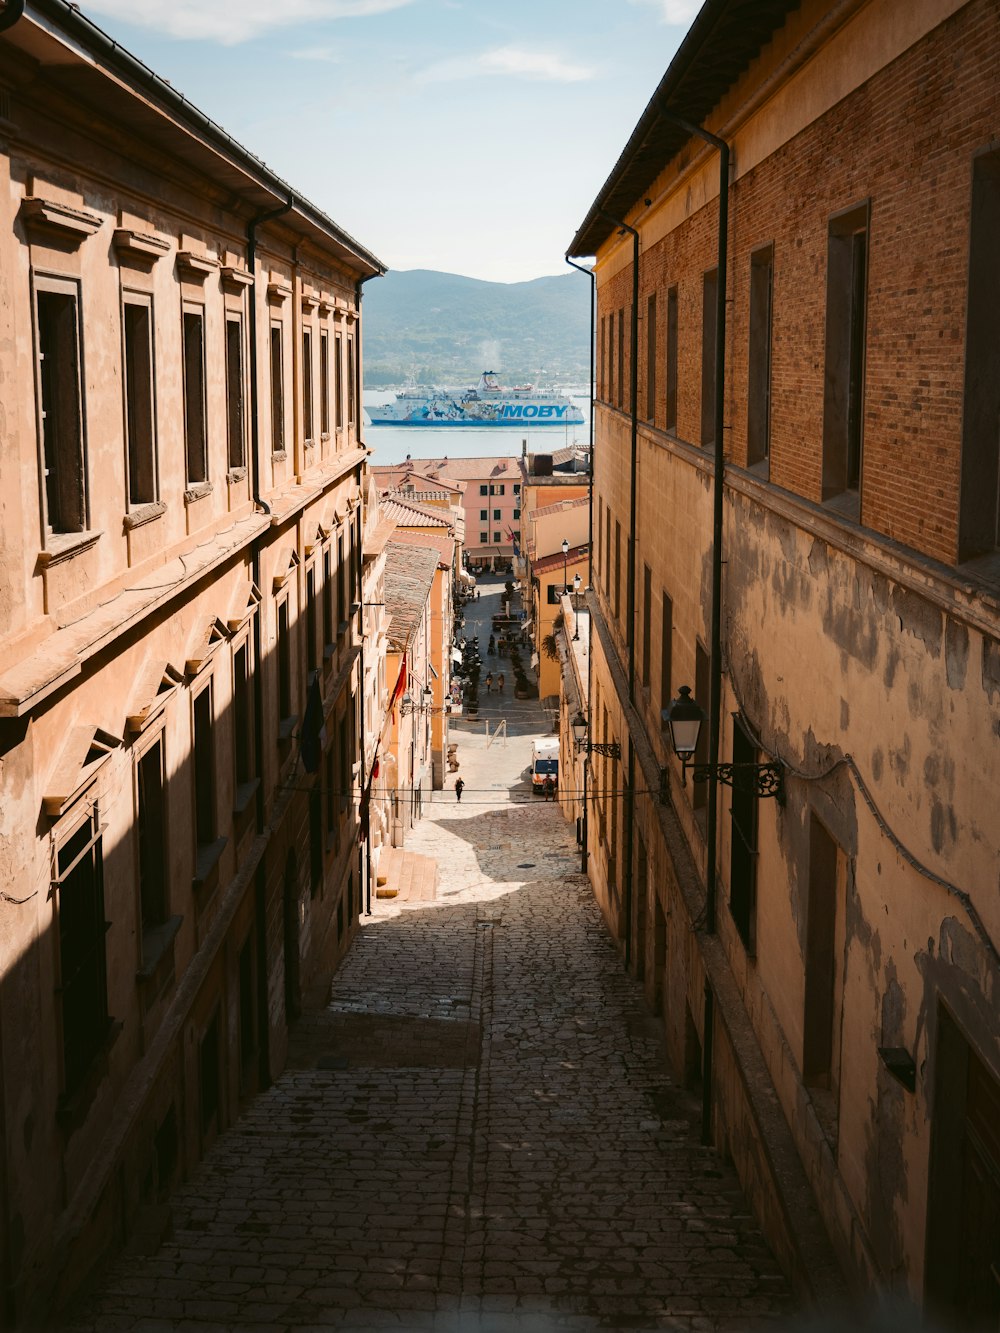 a narrow alley way between two buildings with a body of water in the background